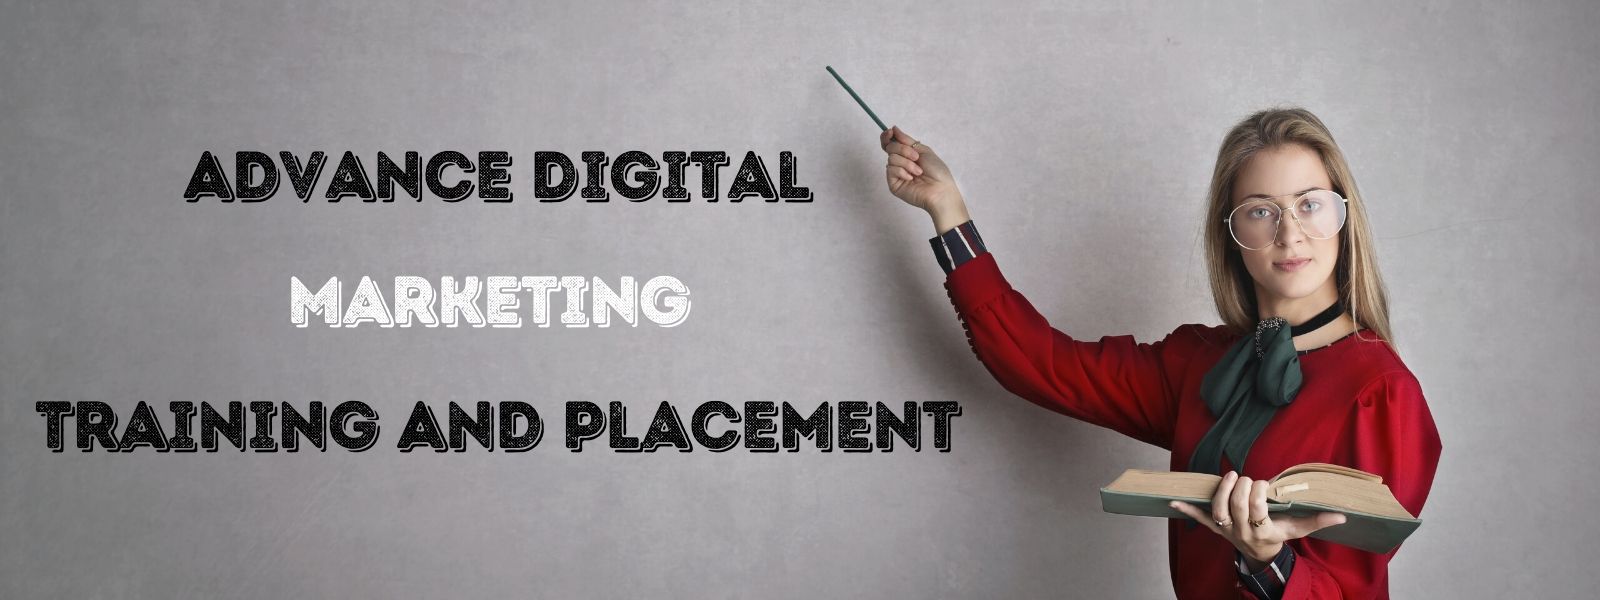 digital marketing training and placement